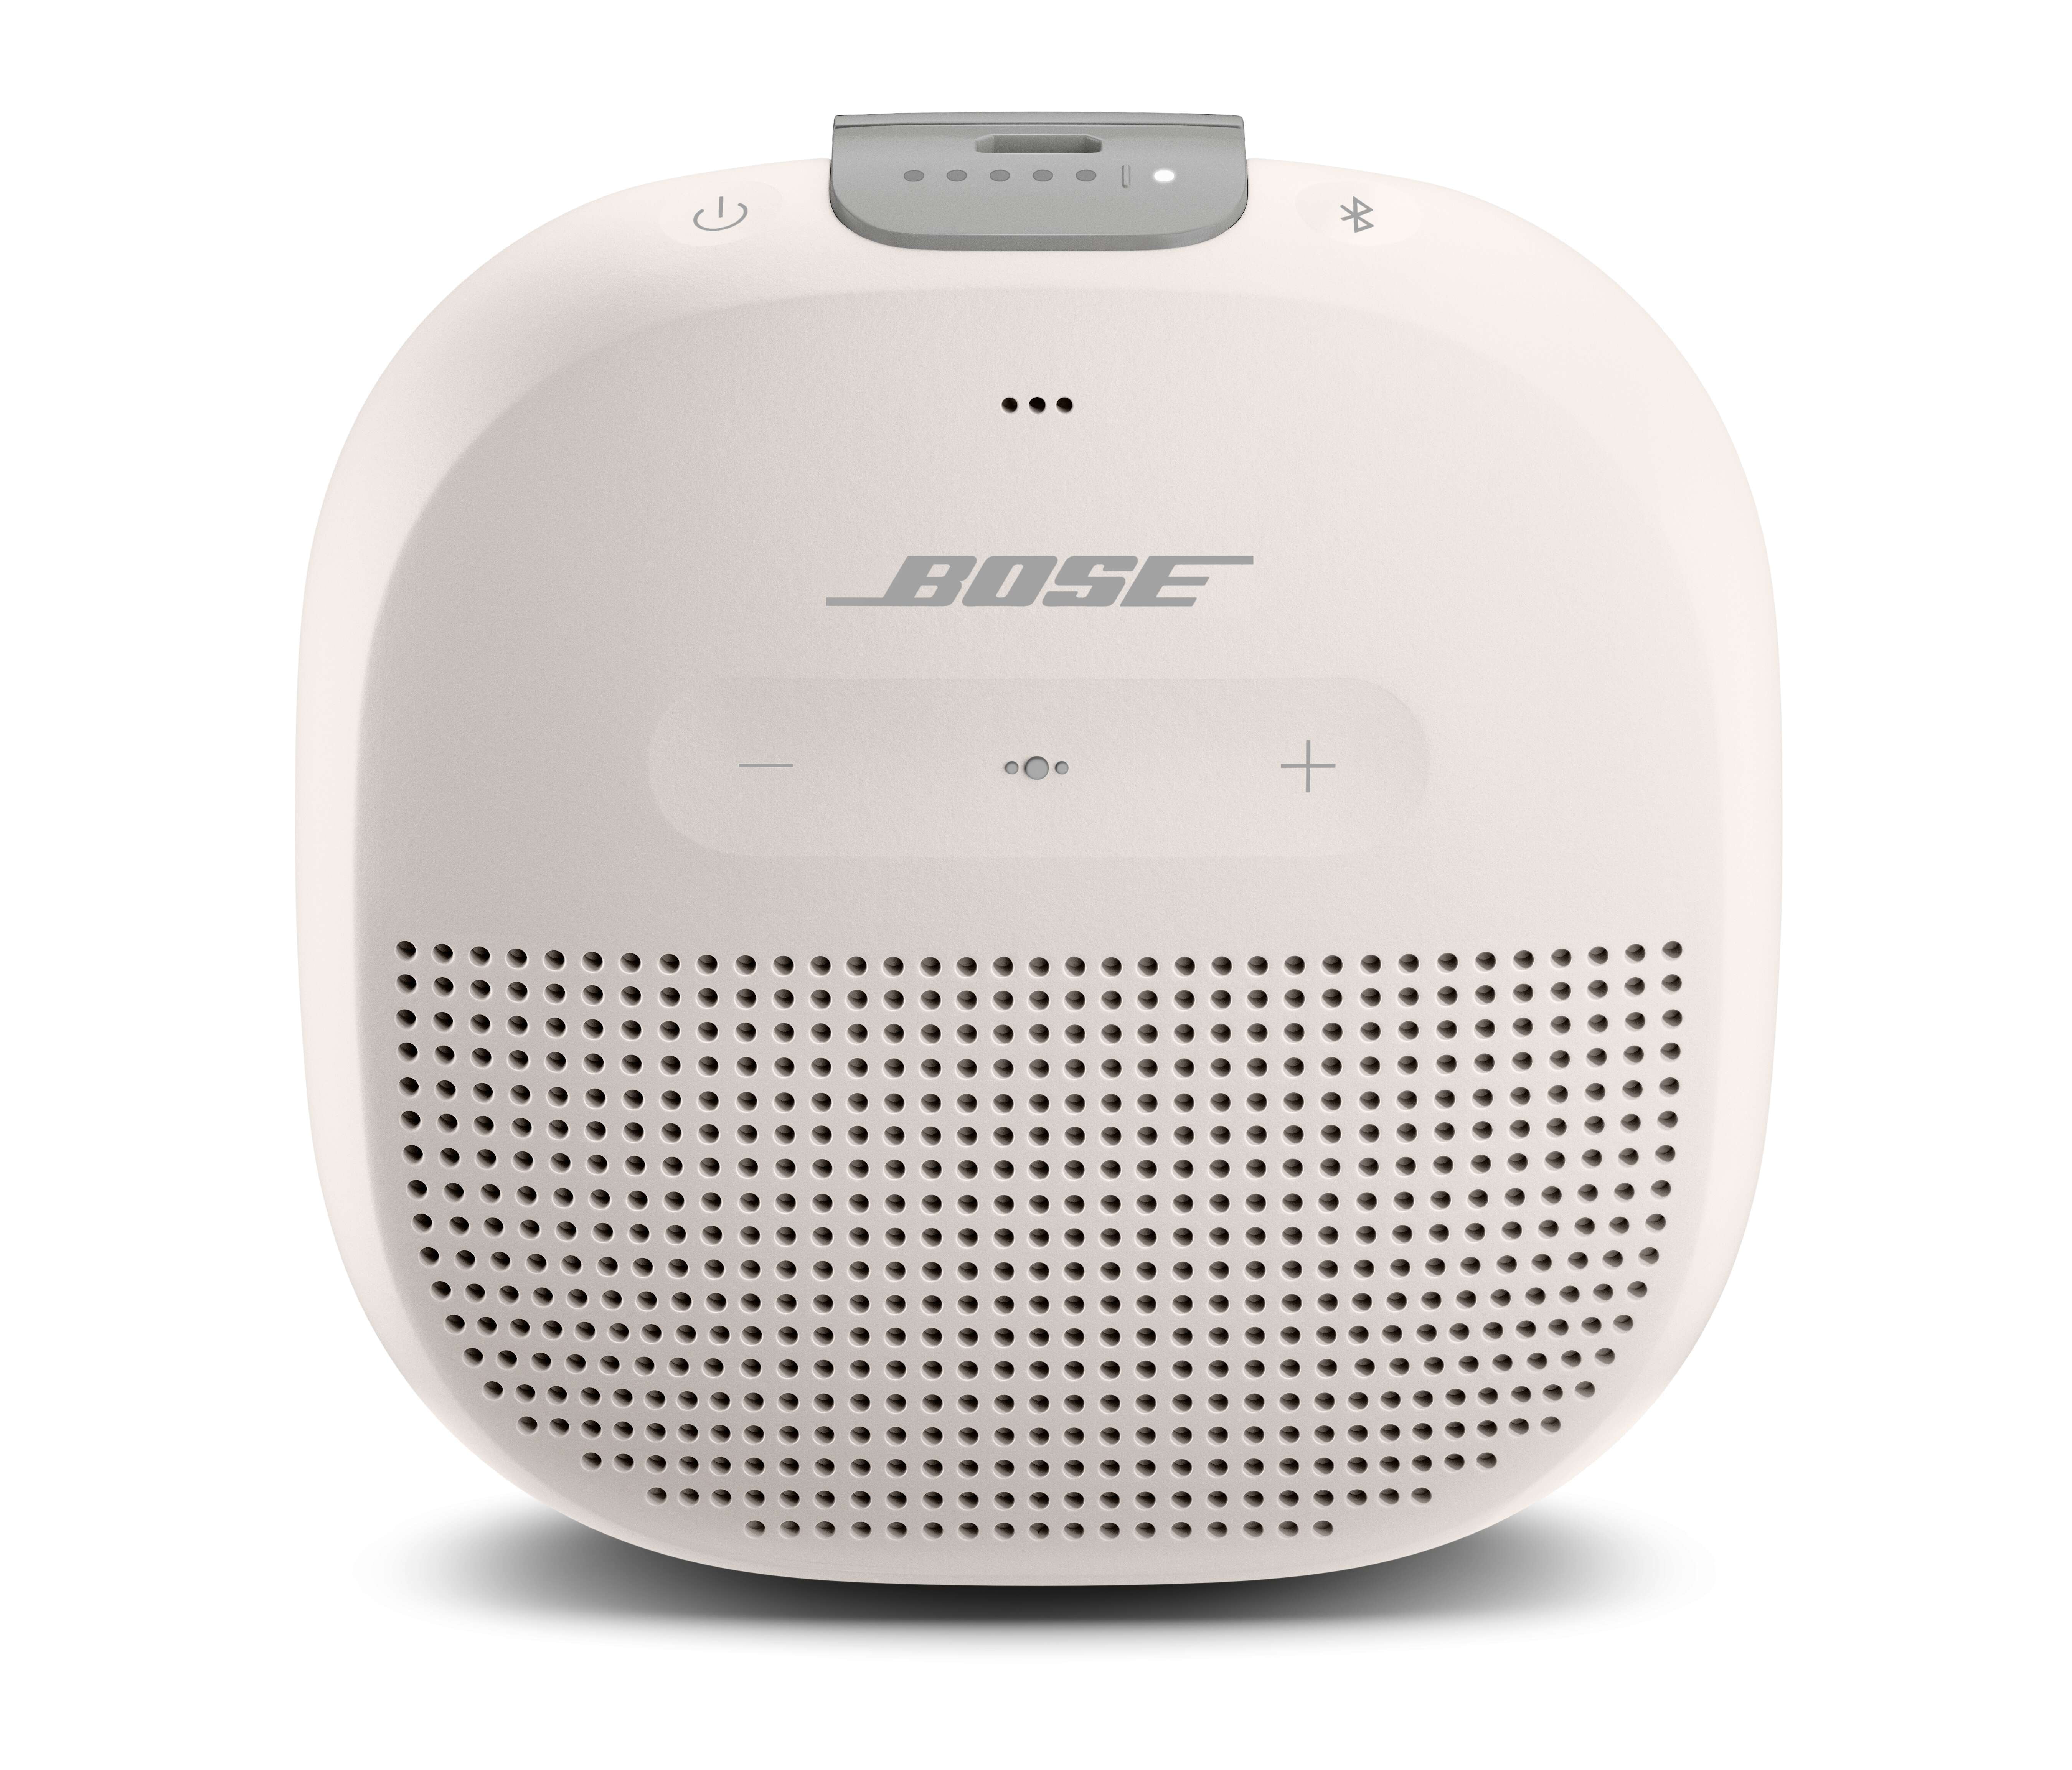  Bose SoundLink Flex Bluetooth Speaker, Portable Speaker with  Microphone, Wireless Waterproof Speaker for Travel, Outdoor and Pool Use,  Black : Electronics